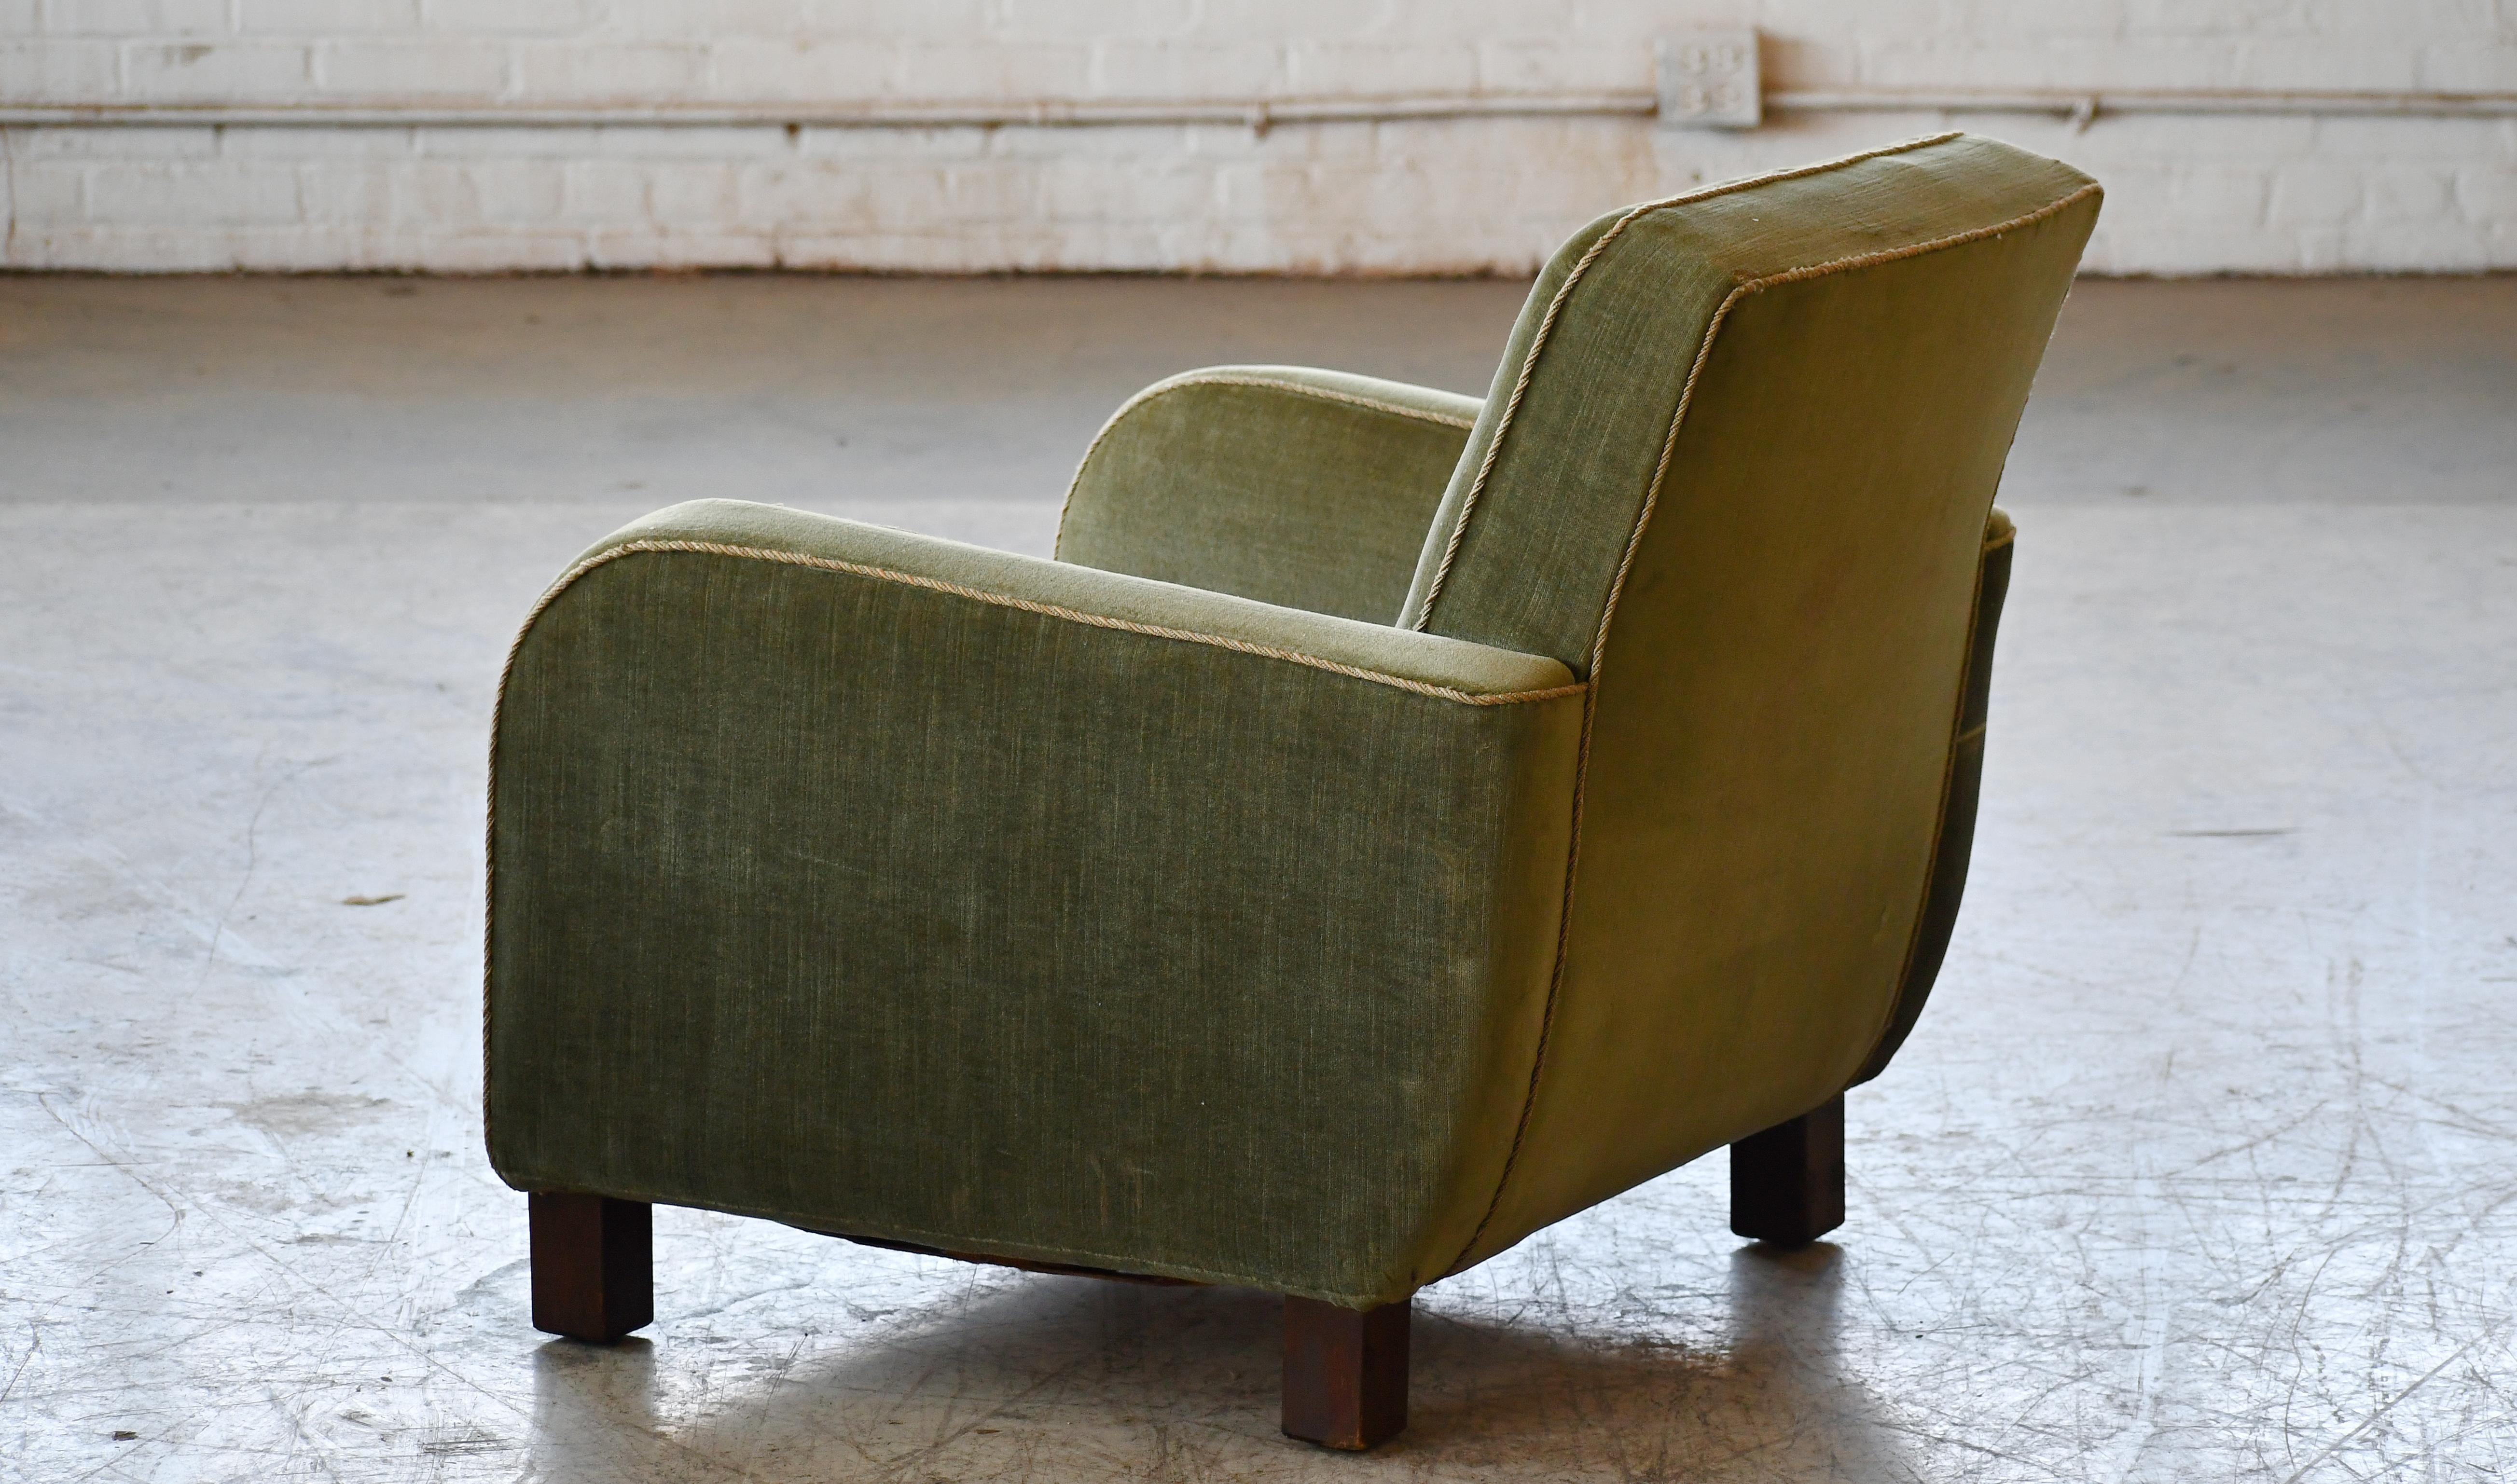 Mid-20th Century 1930-40s Danish Art Deco or Early Midcentury Lounge Chair in Green Mohair For Sale